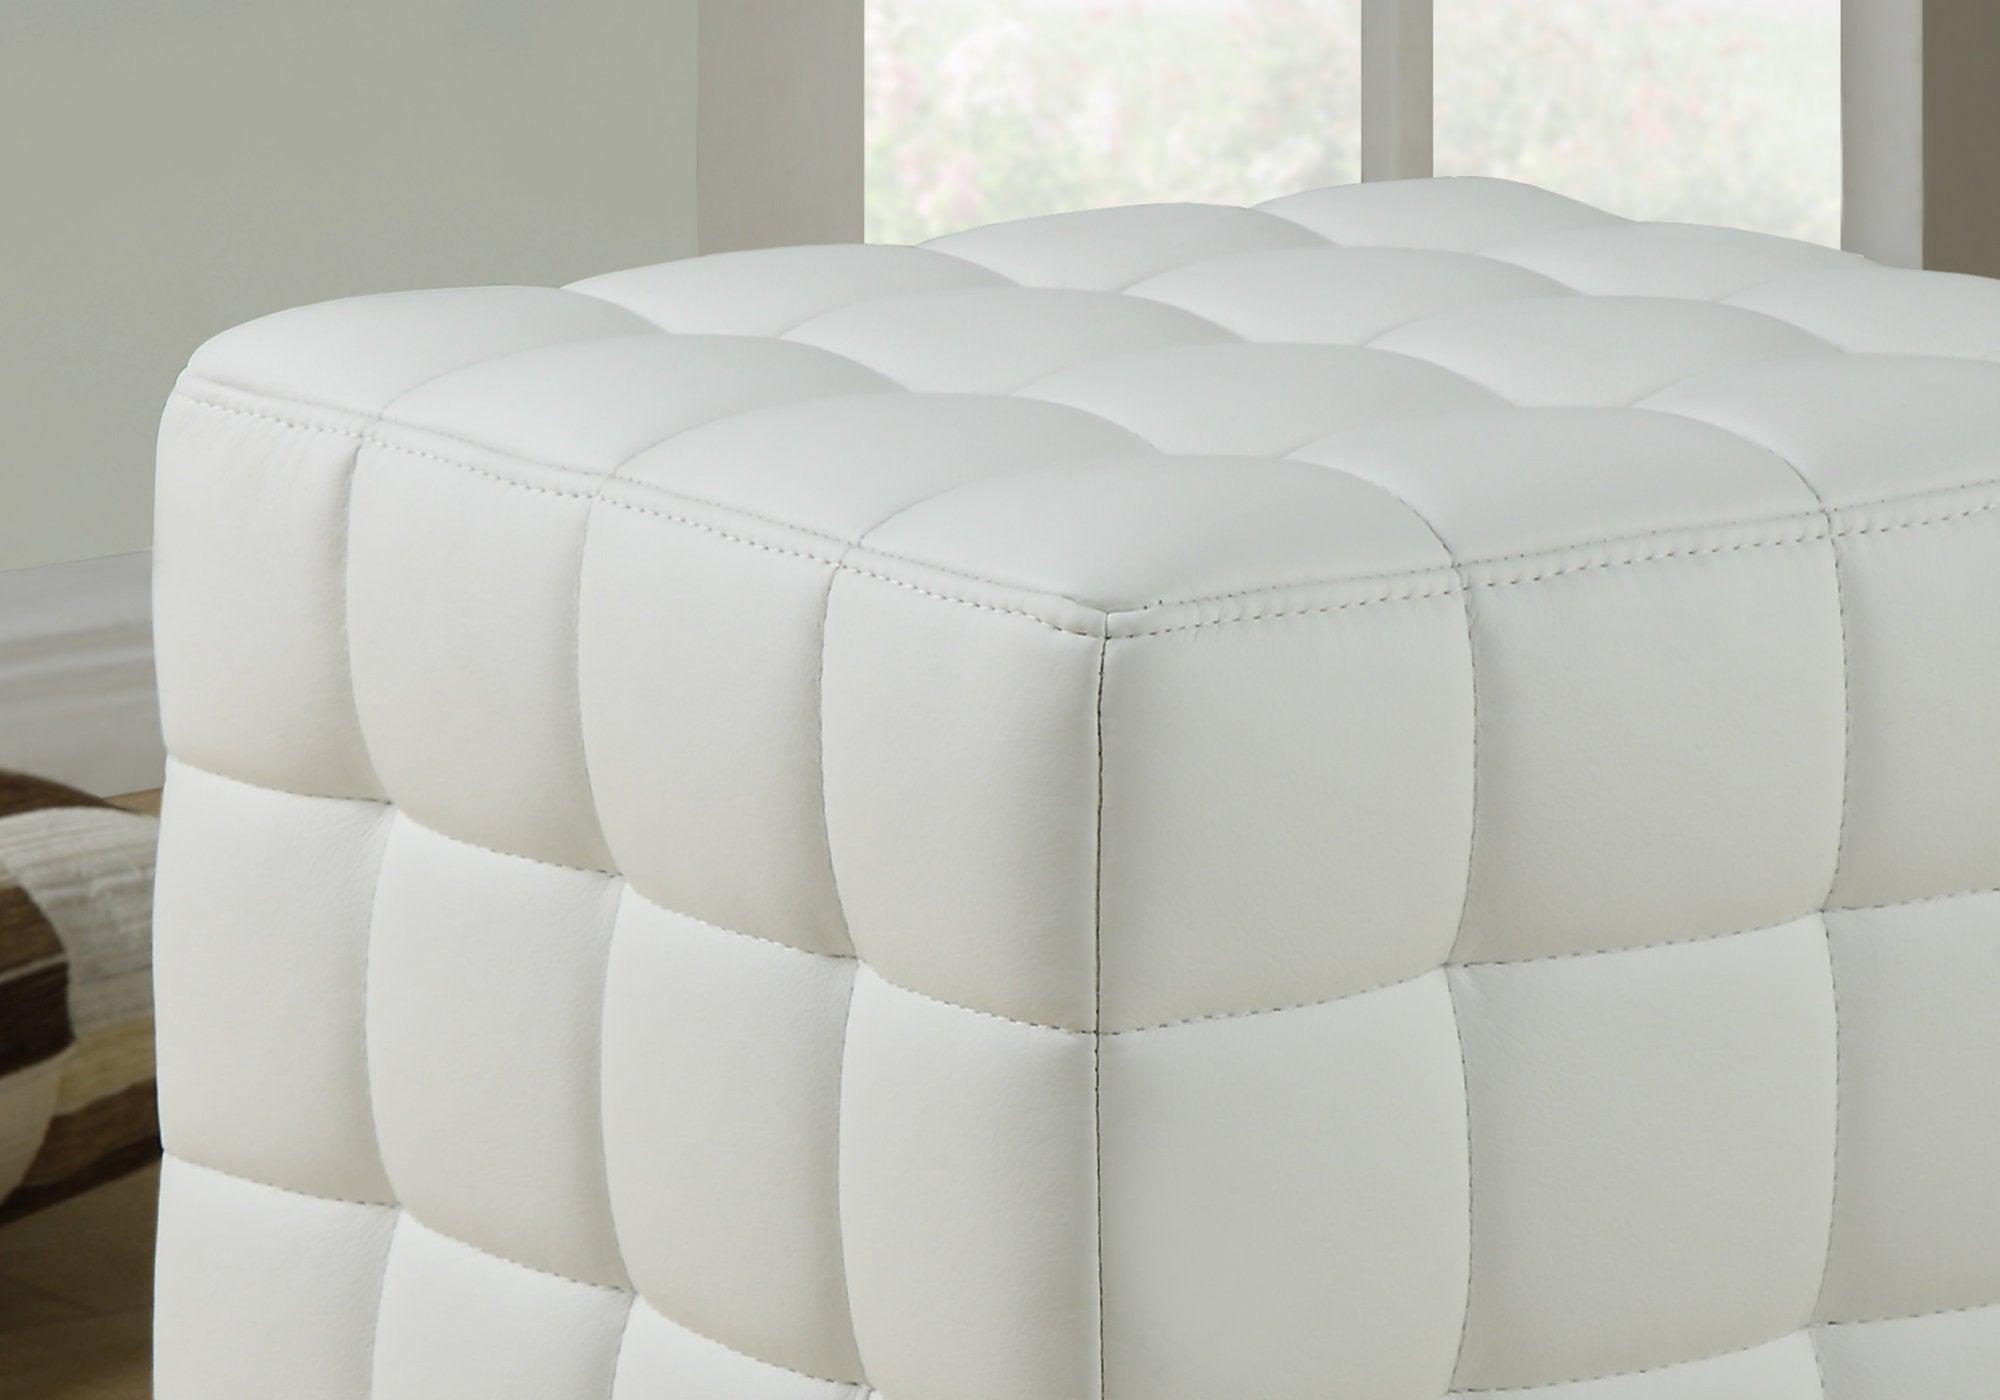 Ottoman - White Leather-Look Fabric